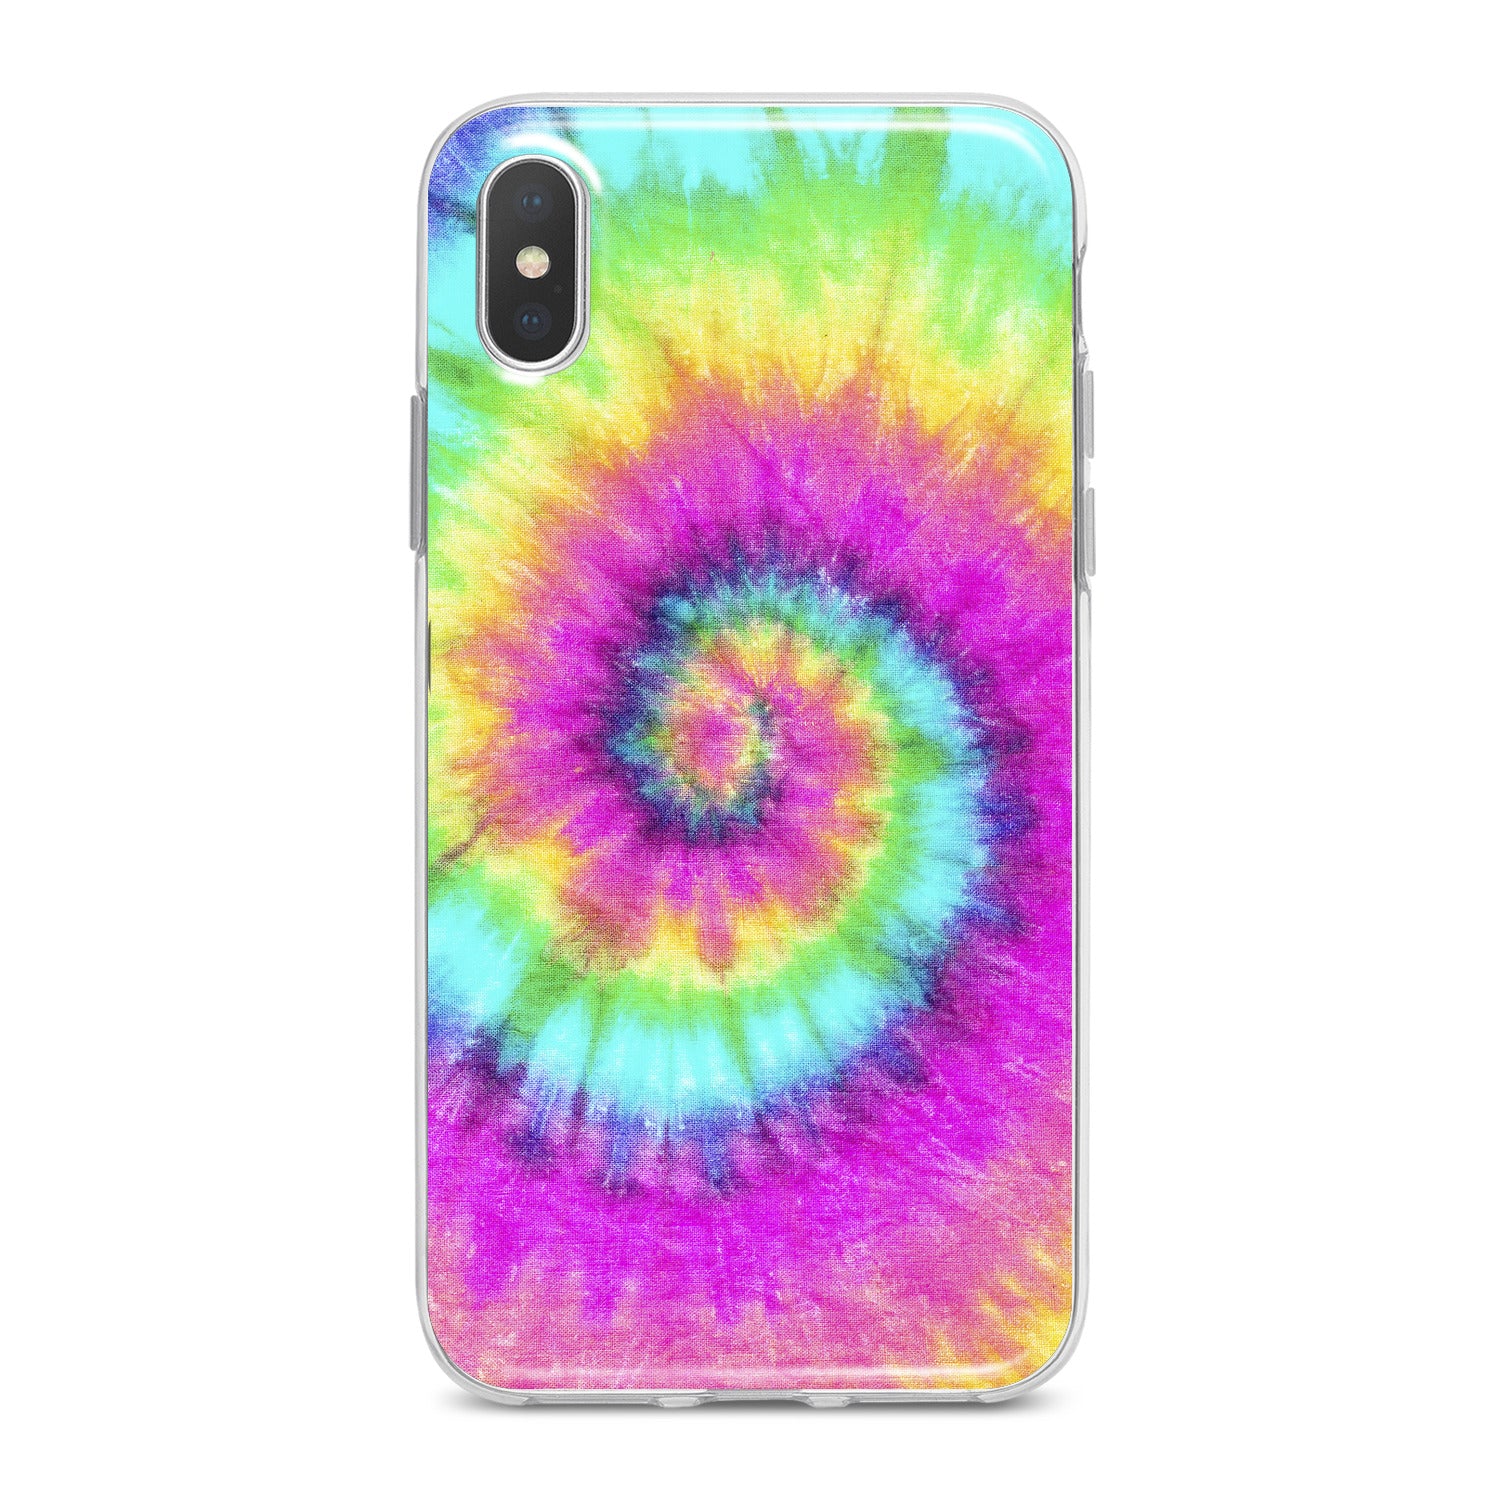 Lex Altern Psychedelic Shell Phone Case for your iPhone & Android phone.